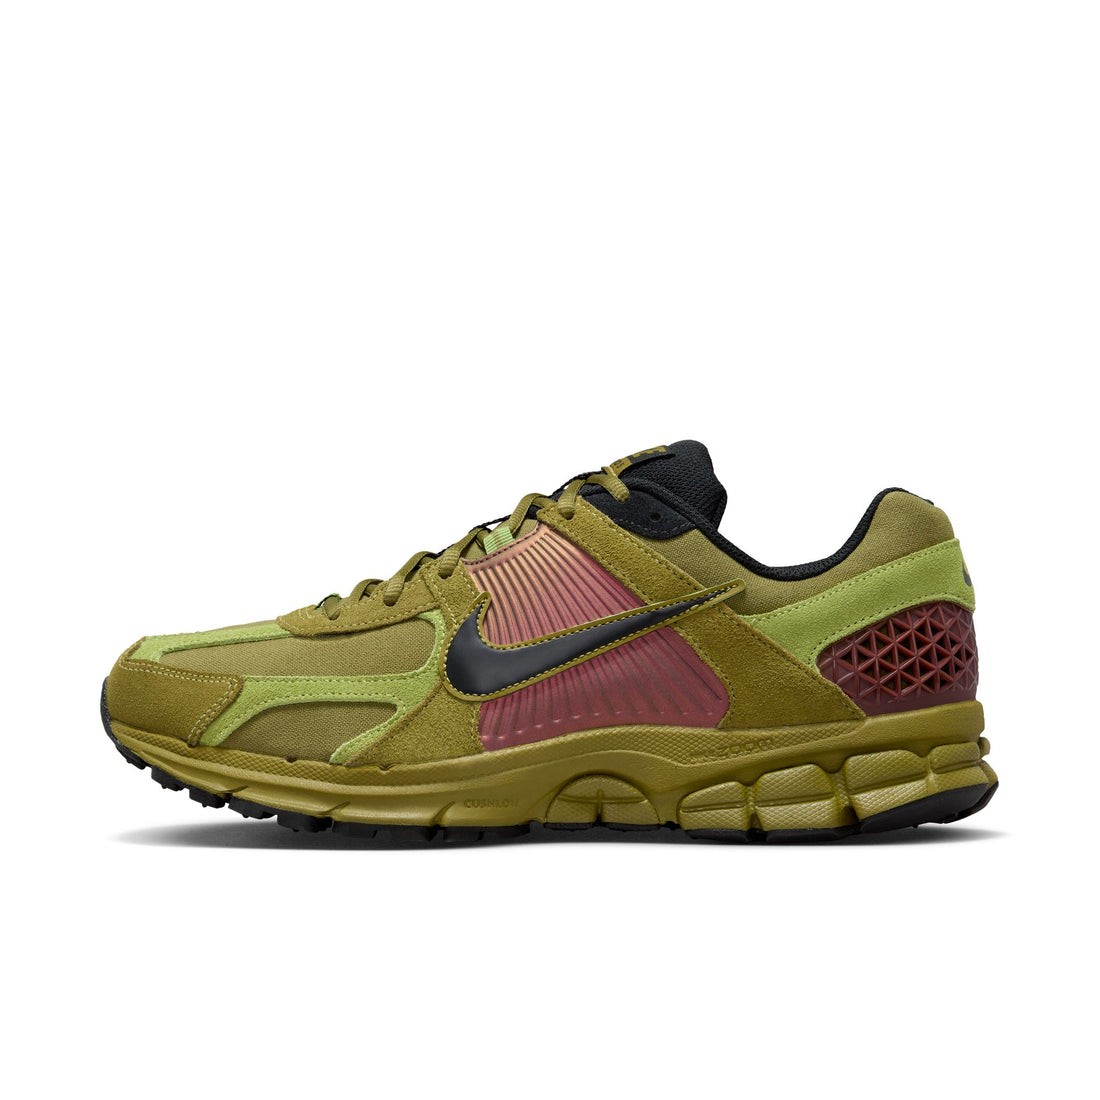 Nike Zoon Vomero 5 (Pacific Moss/Black/Pear)